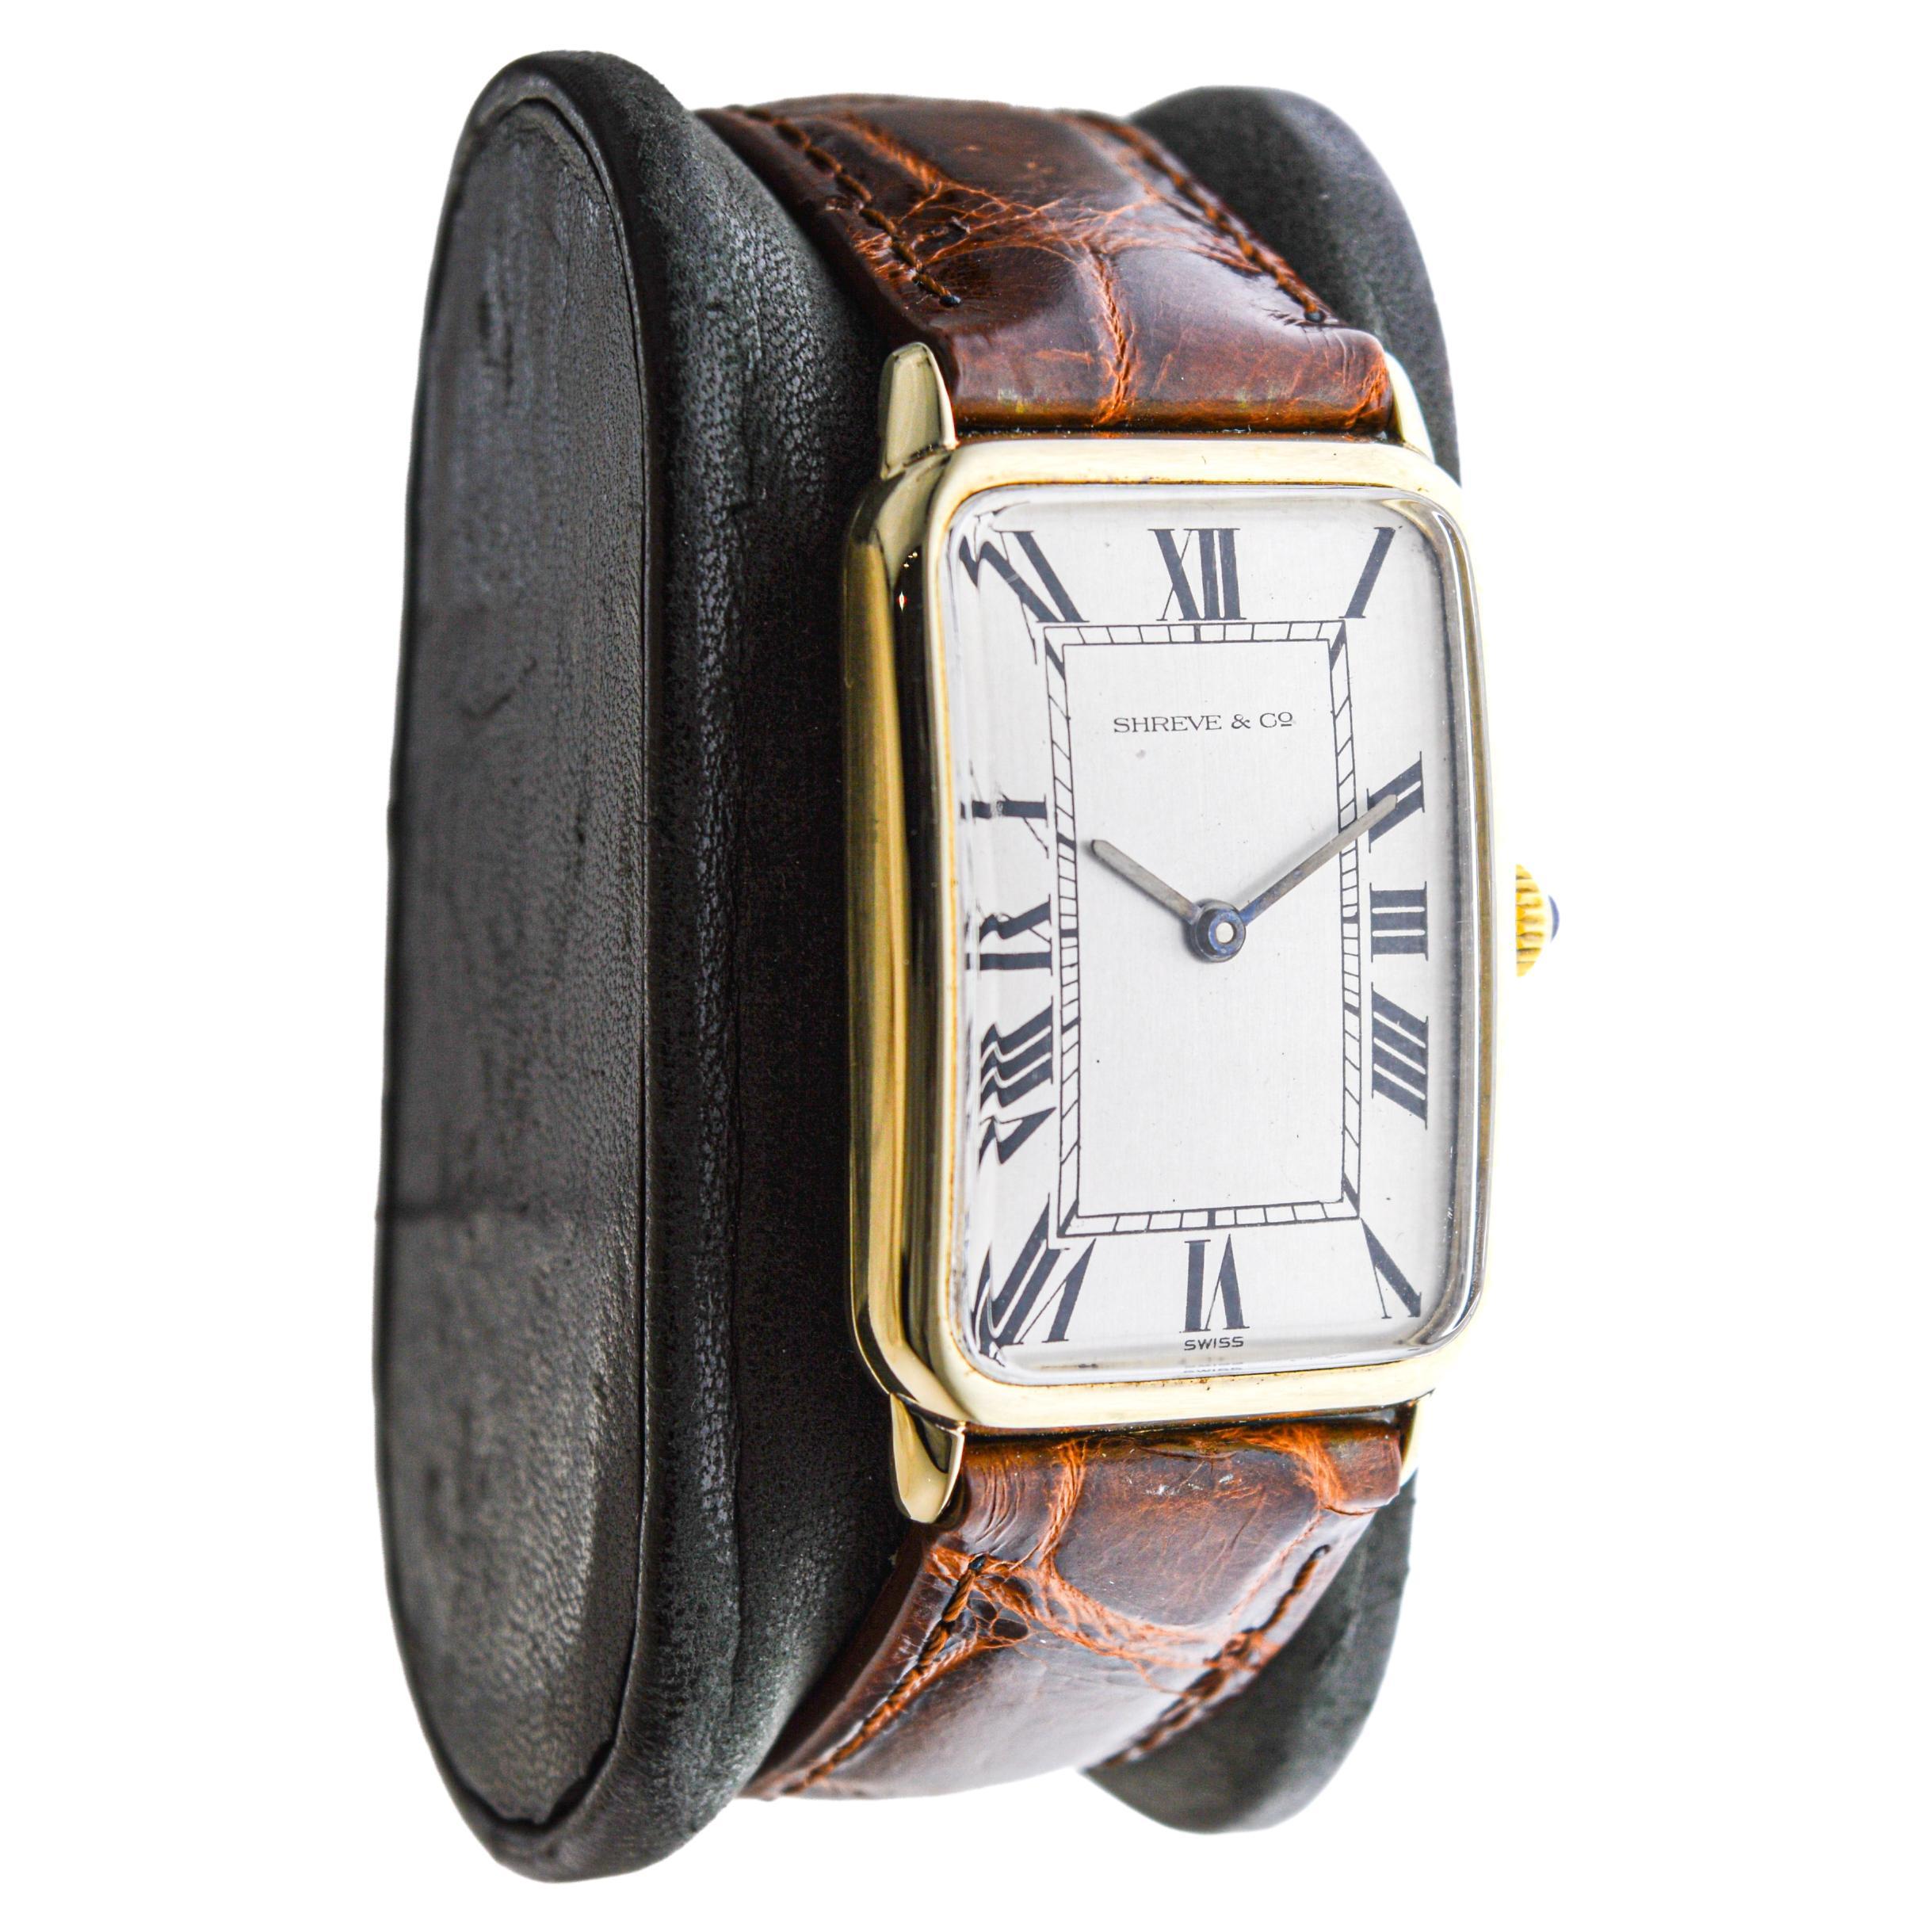 FACTORY / HOUSE: Concord for Shreve & Co. 
STYLE / REFERENCE: Art Deco Style / Reference 302230
MOVEMENT / CALIBER: 17 Jewels Manual Winding / Caliber 259
DIAL / HANDS: Silvered Roman Numbers / Blued Steel Baton Hands
DIMENSIONS: Length 42mm X Width